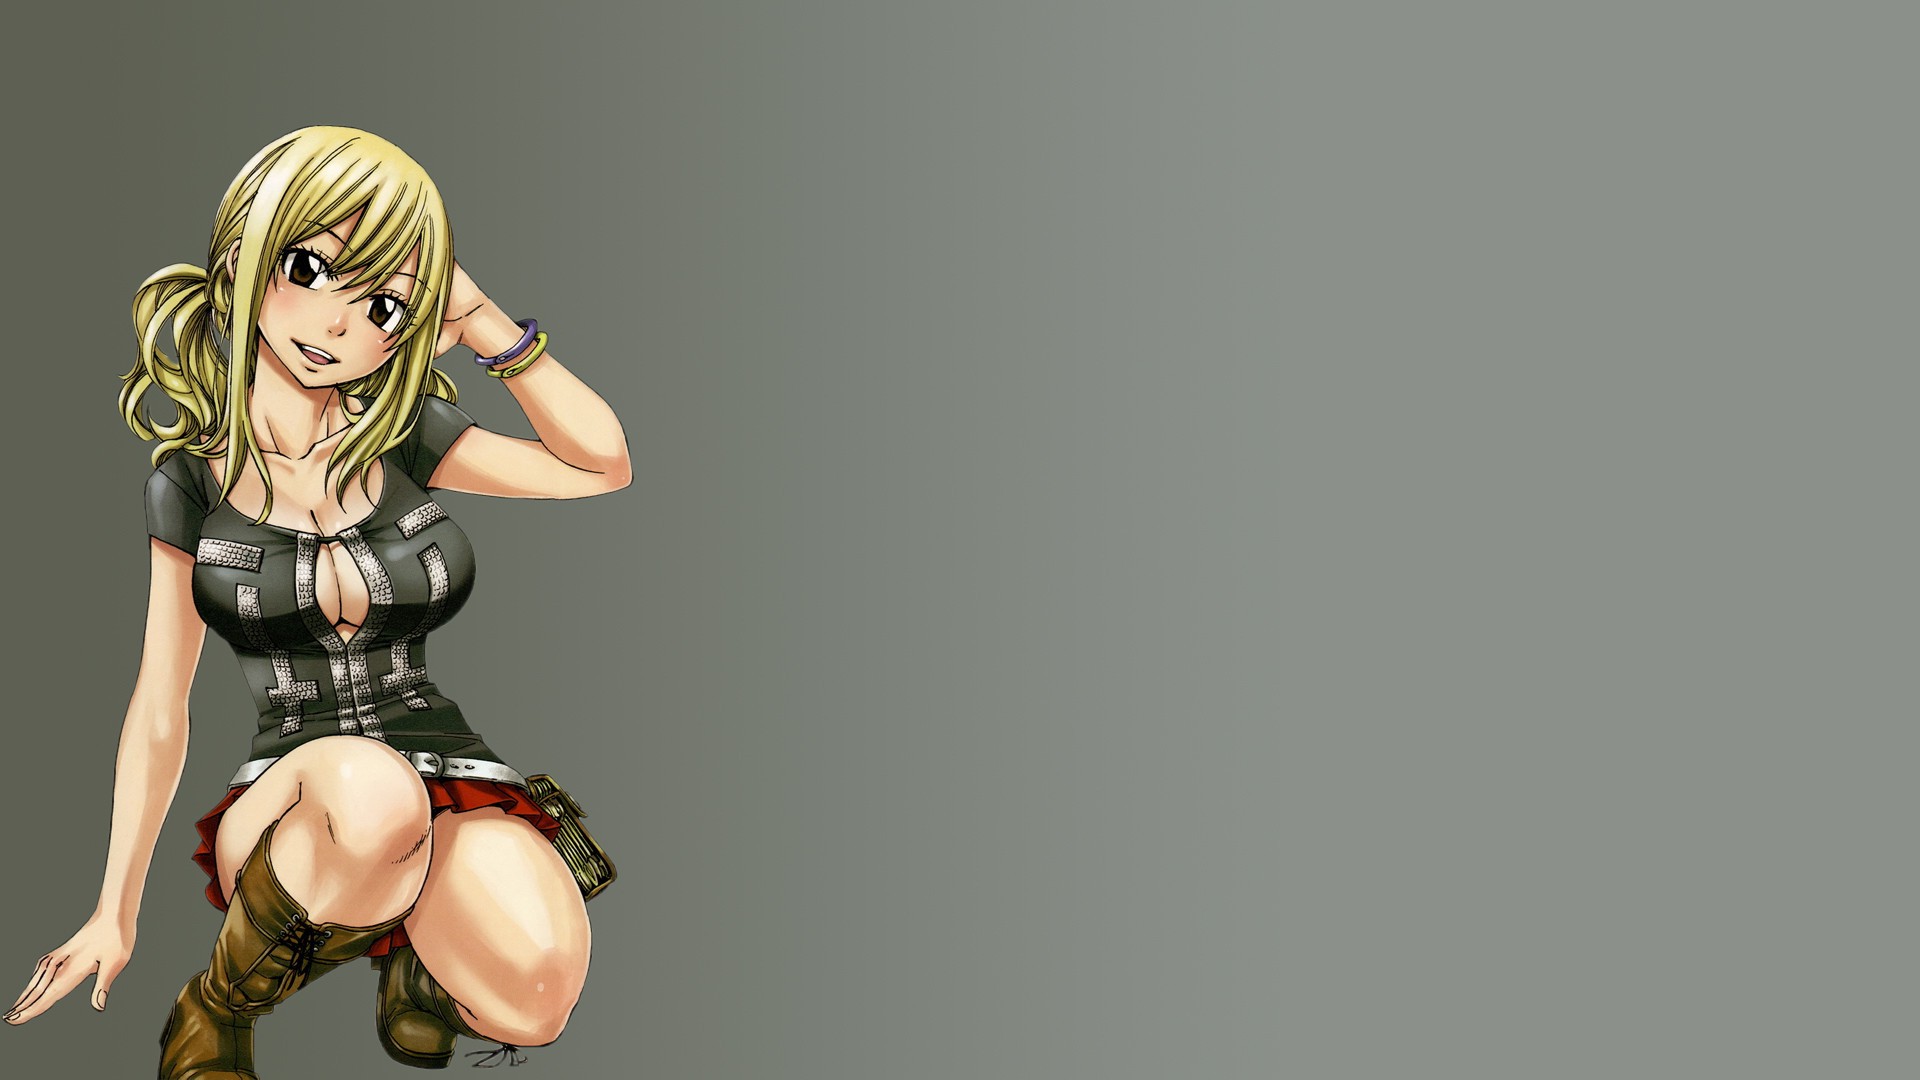 Anime Girls Heartfilia Lucy Fairy Tail Wallpapers Hd